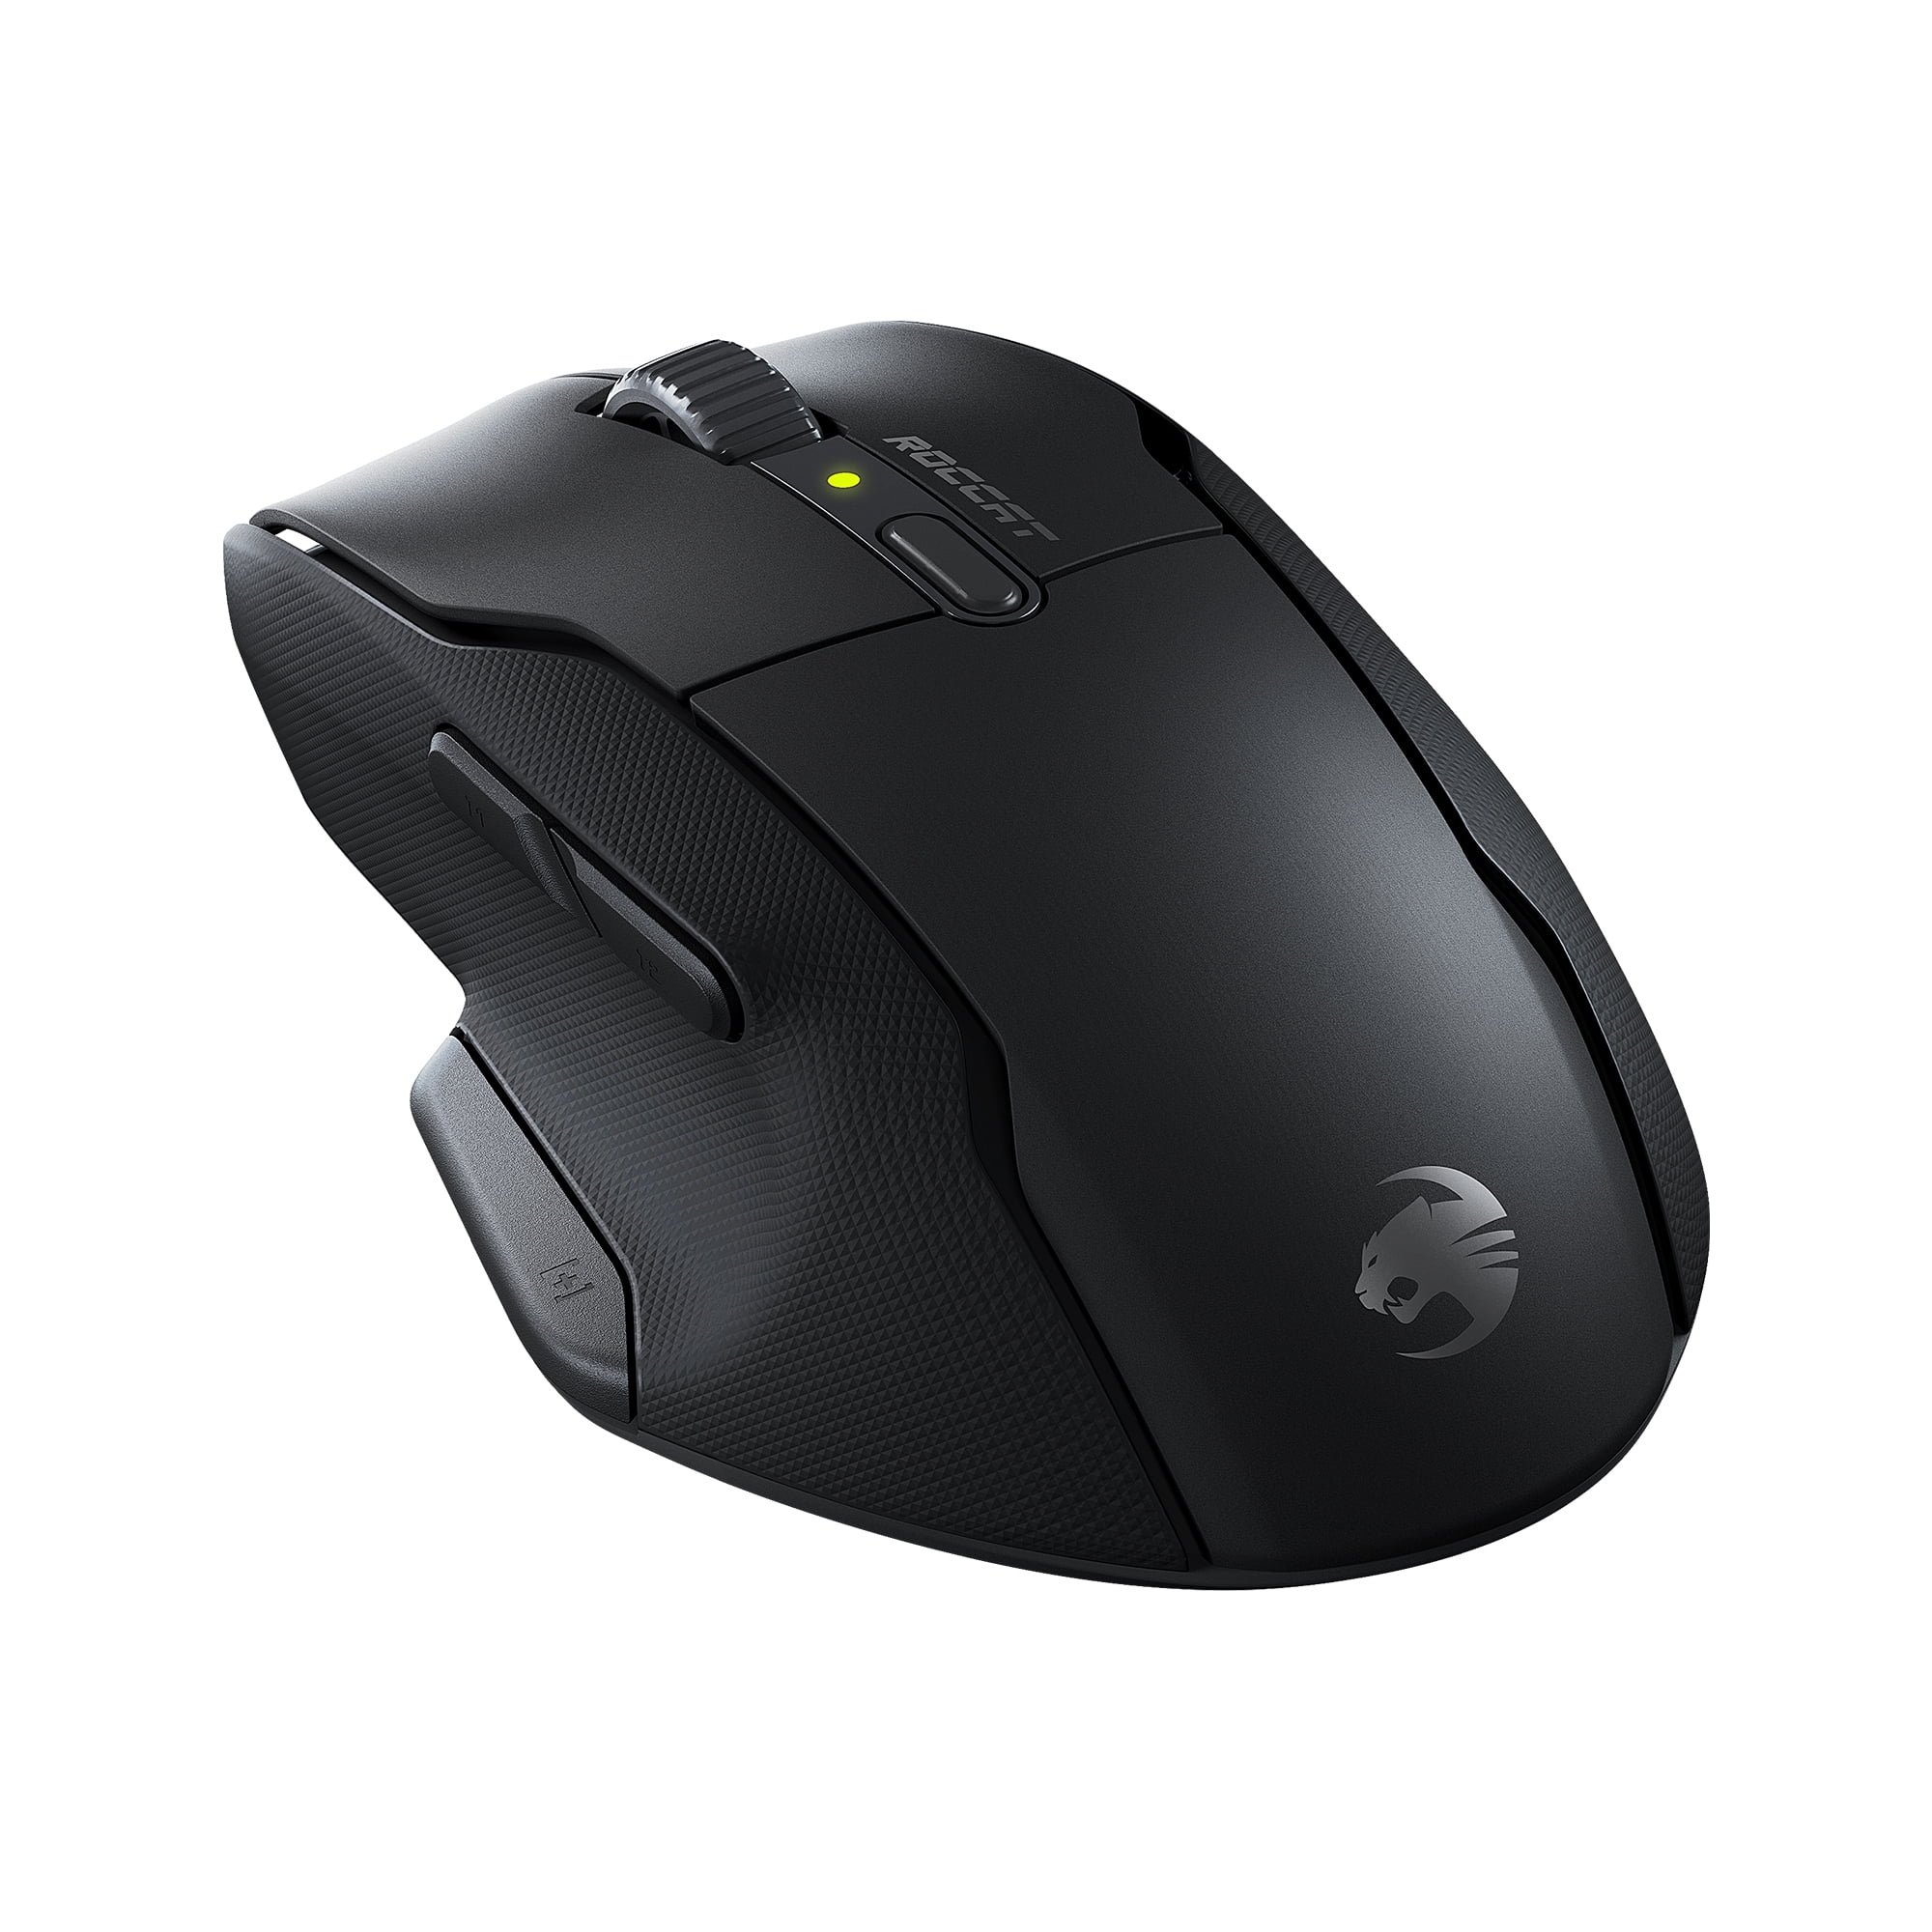 Programmable - Double-Injected Titan Battery Sensor, Air Button Optical Grips, & Design Mouse ROCCAT Optical Rubber Kone 800-hour Life, 19K With Side DPI Wireless - Gaming Switches Ergonomic Black